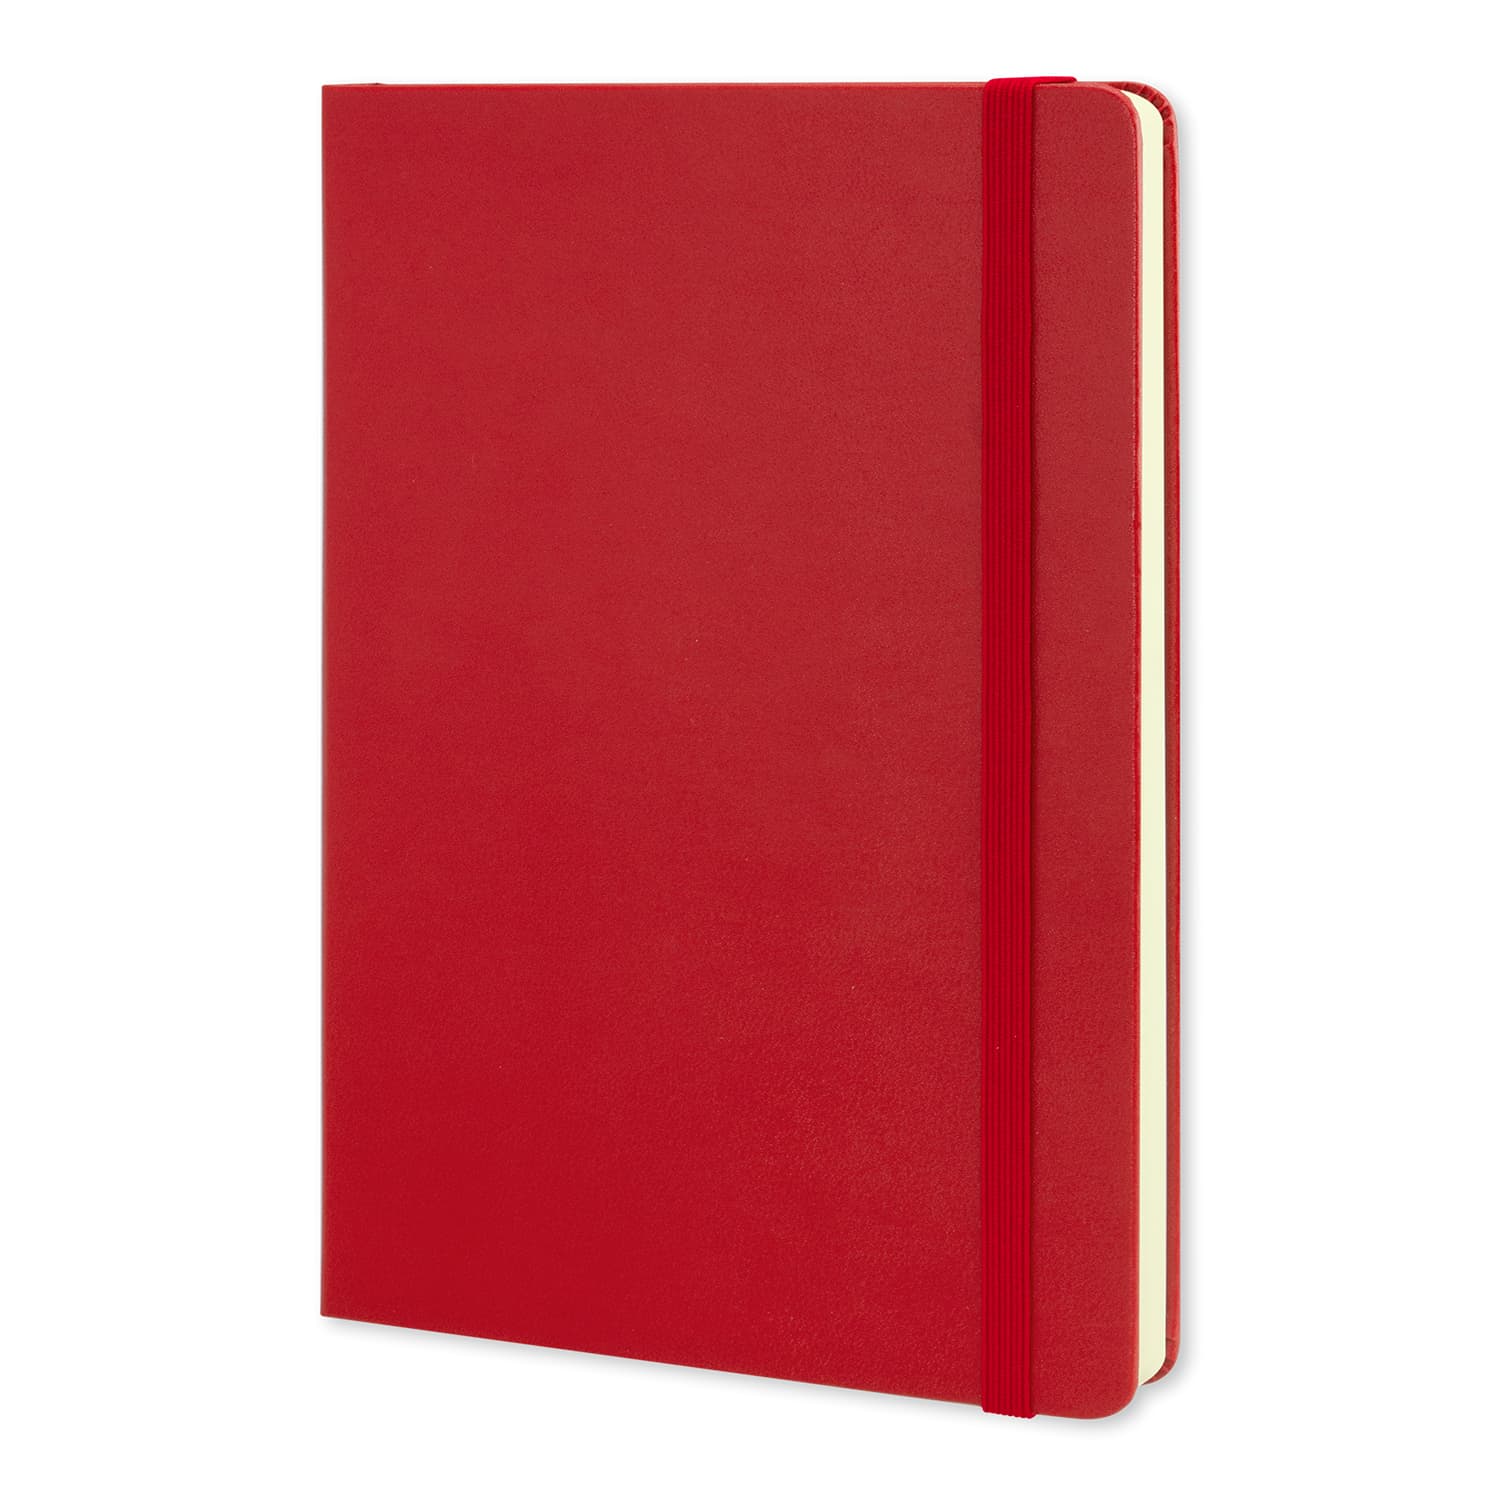 Scarlet Red A5 Moleskine Classic Hard Cover Notebook